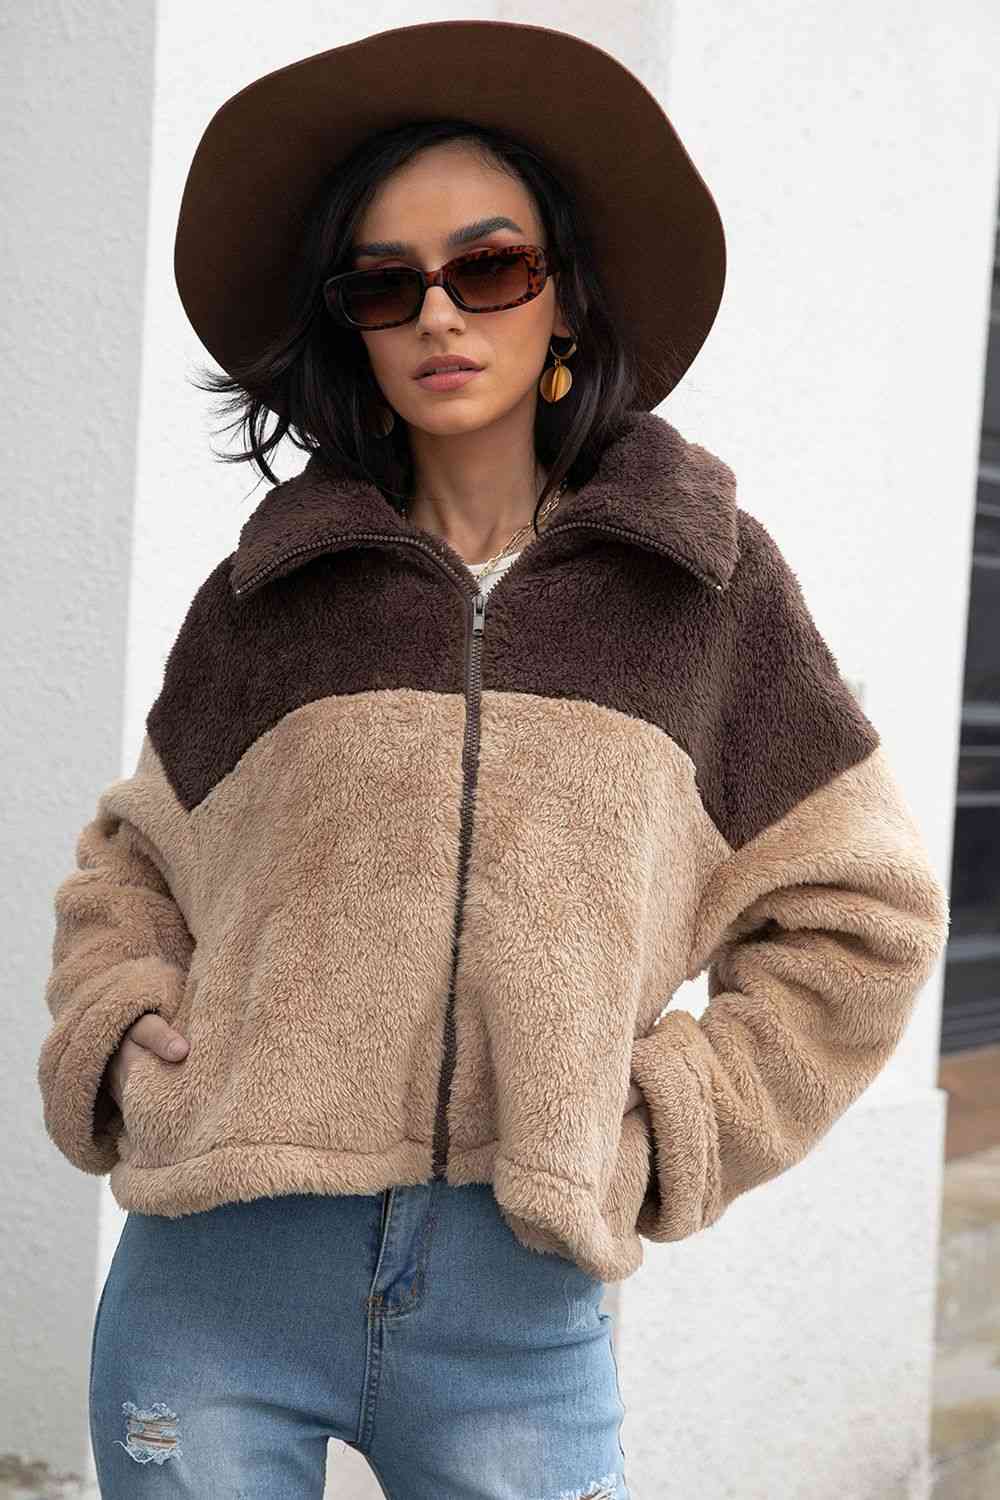 A 'Neck Fuzzy Jacket,' a cozy and warm jacket typically featuring a soft and fuzzy material around the neck or collar area, providing comfort and style for chilly weather.